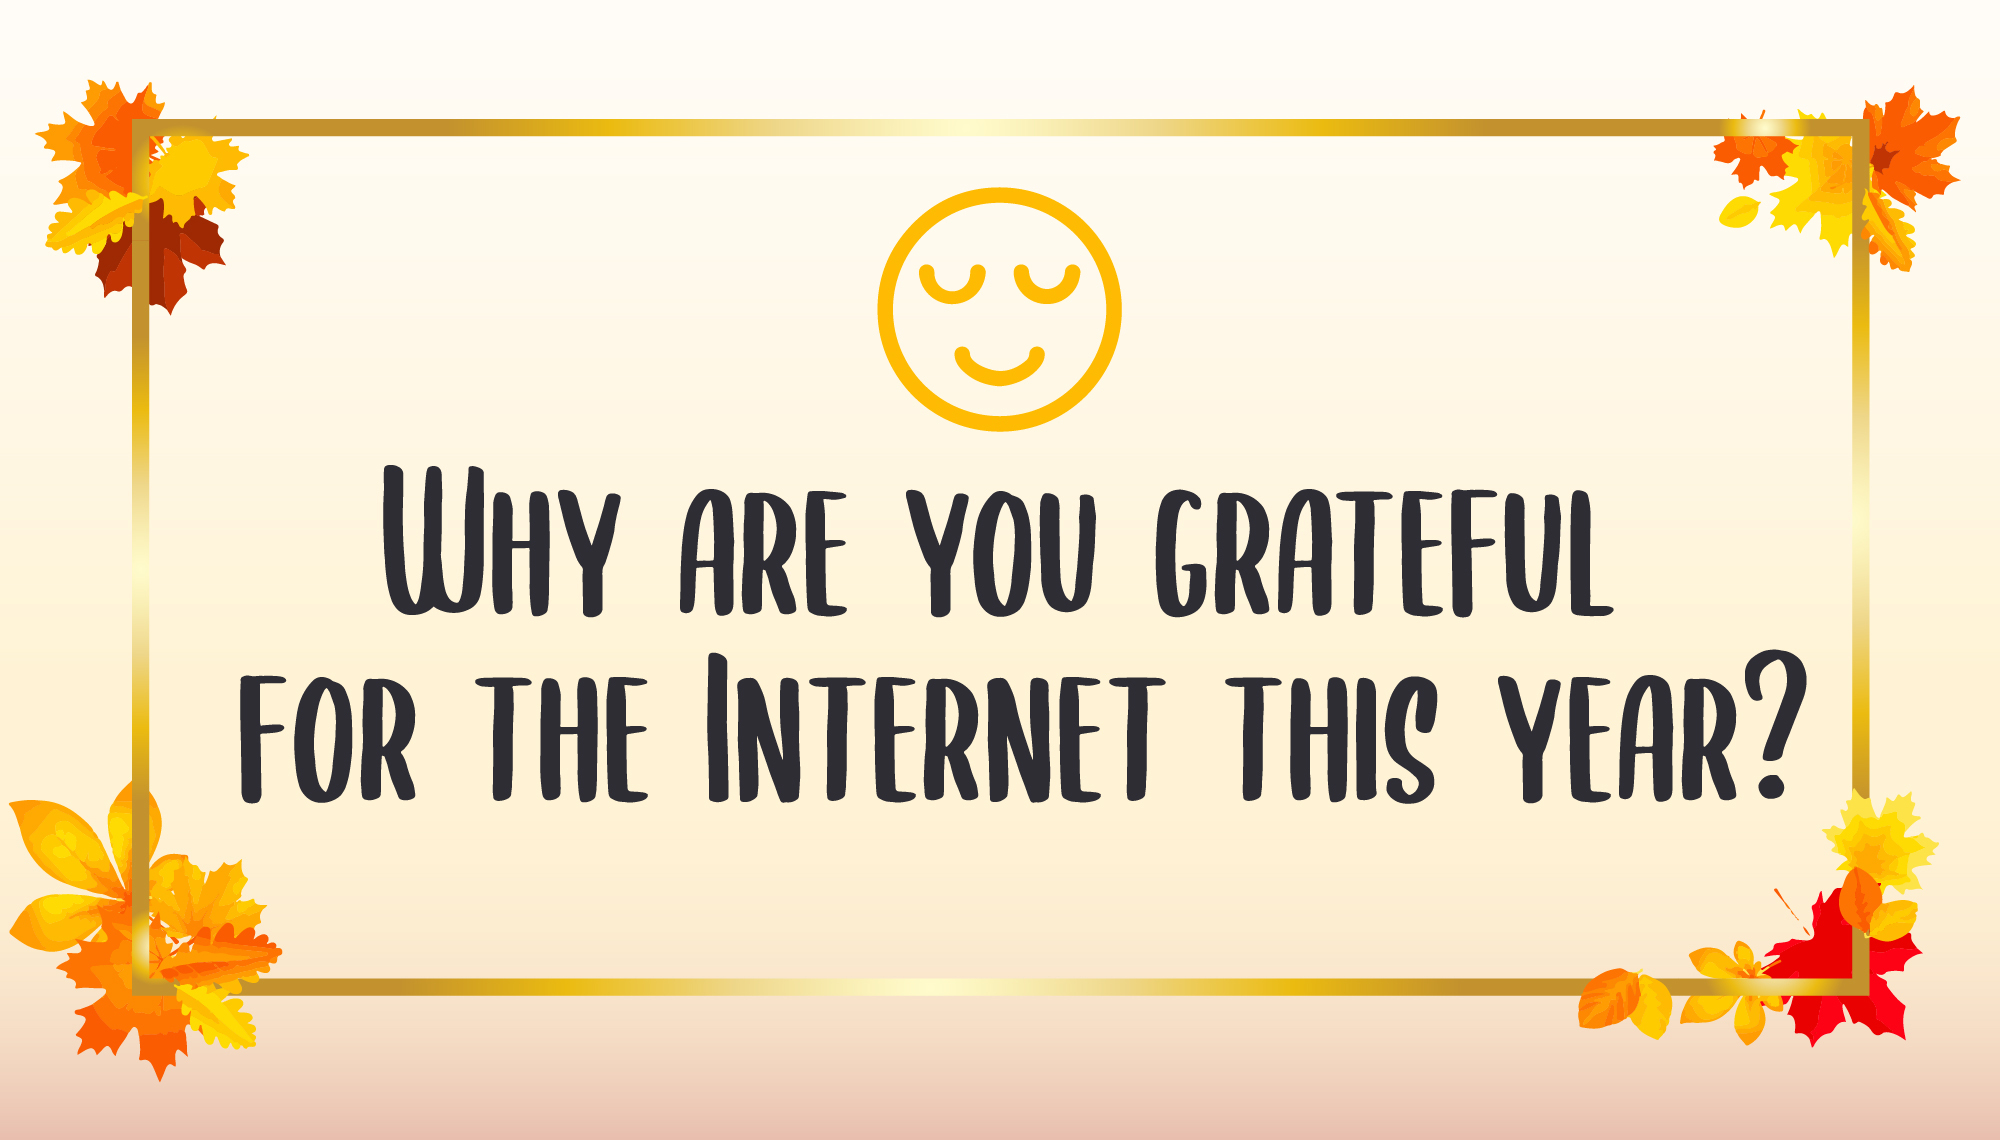 Why are you grateful for the Internet this year?